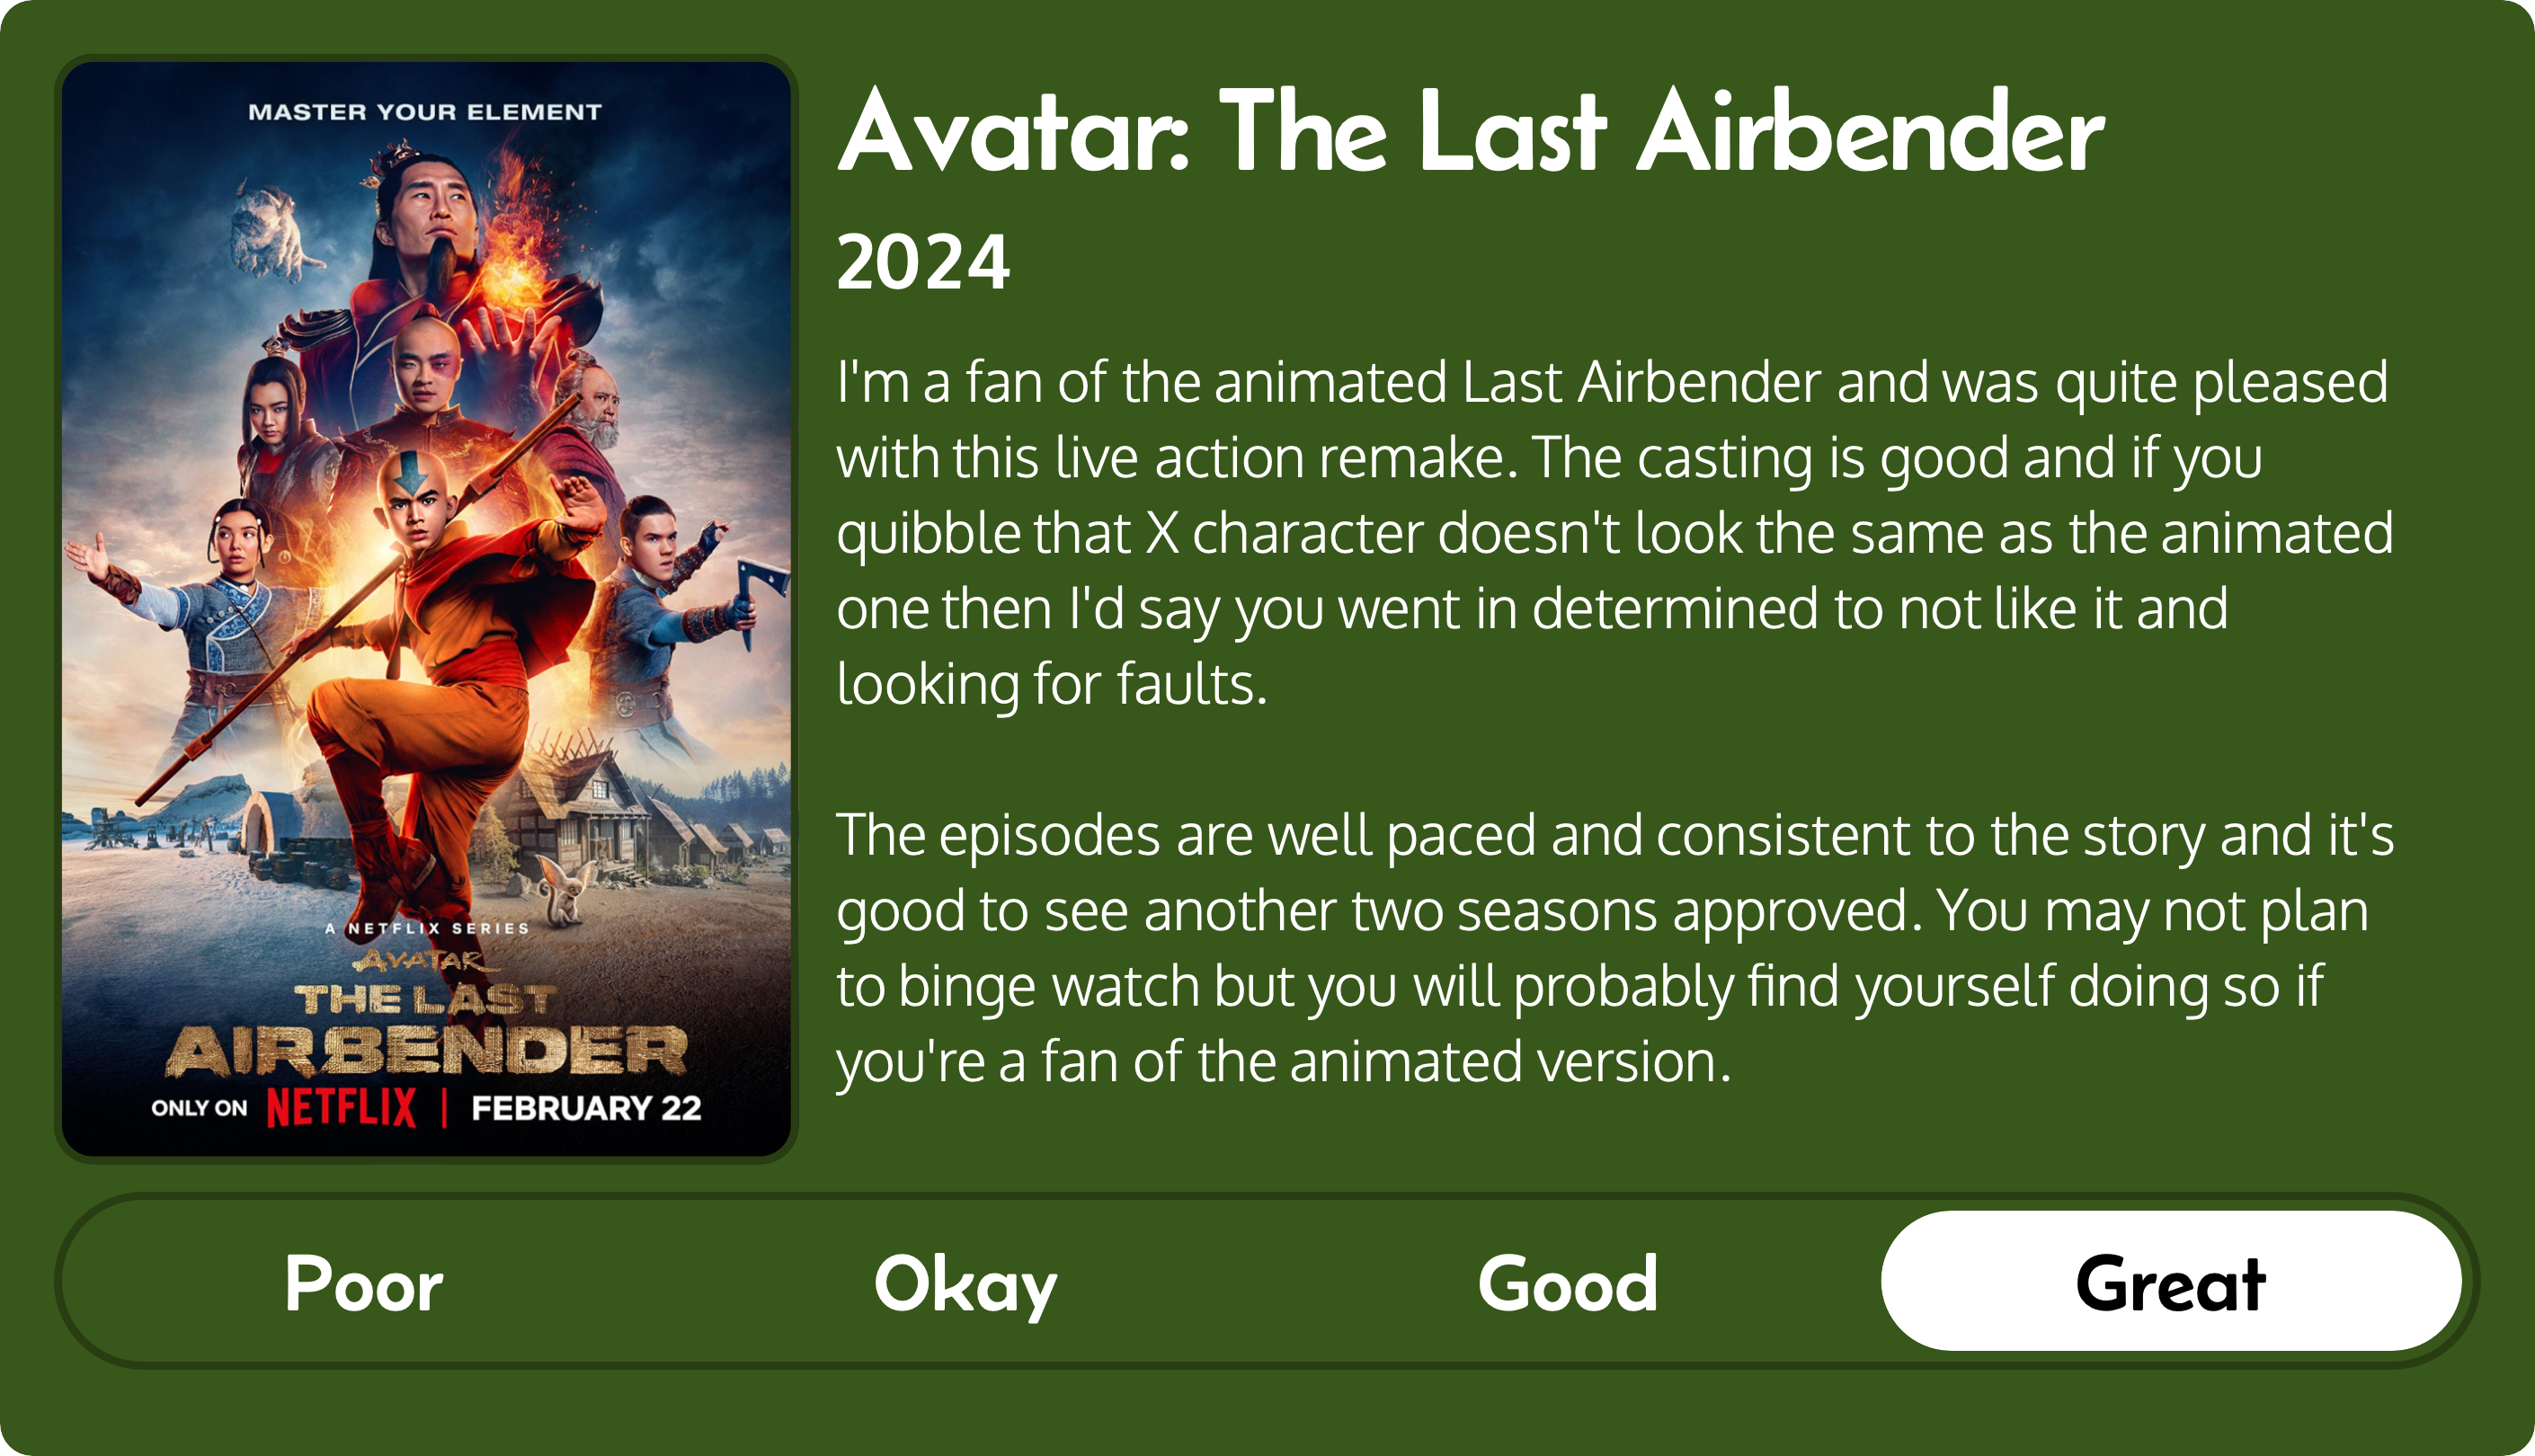 A rectangular image with a review of the Netflix series Avatar The Last Airbender (2024). The left third contains the series poster and the review is in other two-thirds. Across the bottom is a rating of Poor Okay Good Great with Great selected. The review reads: I'm a fan of the animated Last Airbender and was quite pleased with this live action remake. The casting is good and if you quibble that X character doesn't look the same as the animated one then I'd say you went in determined to not like it and looking for faults. The episodes are well paced and consistent to the story and it's good to see another two seasons approved. You may not plan to binge watch but you will probably find yourself doing so if you're a fan of the animated version.